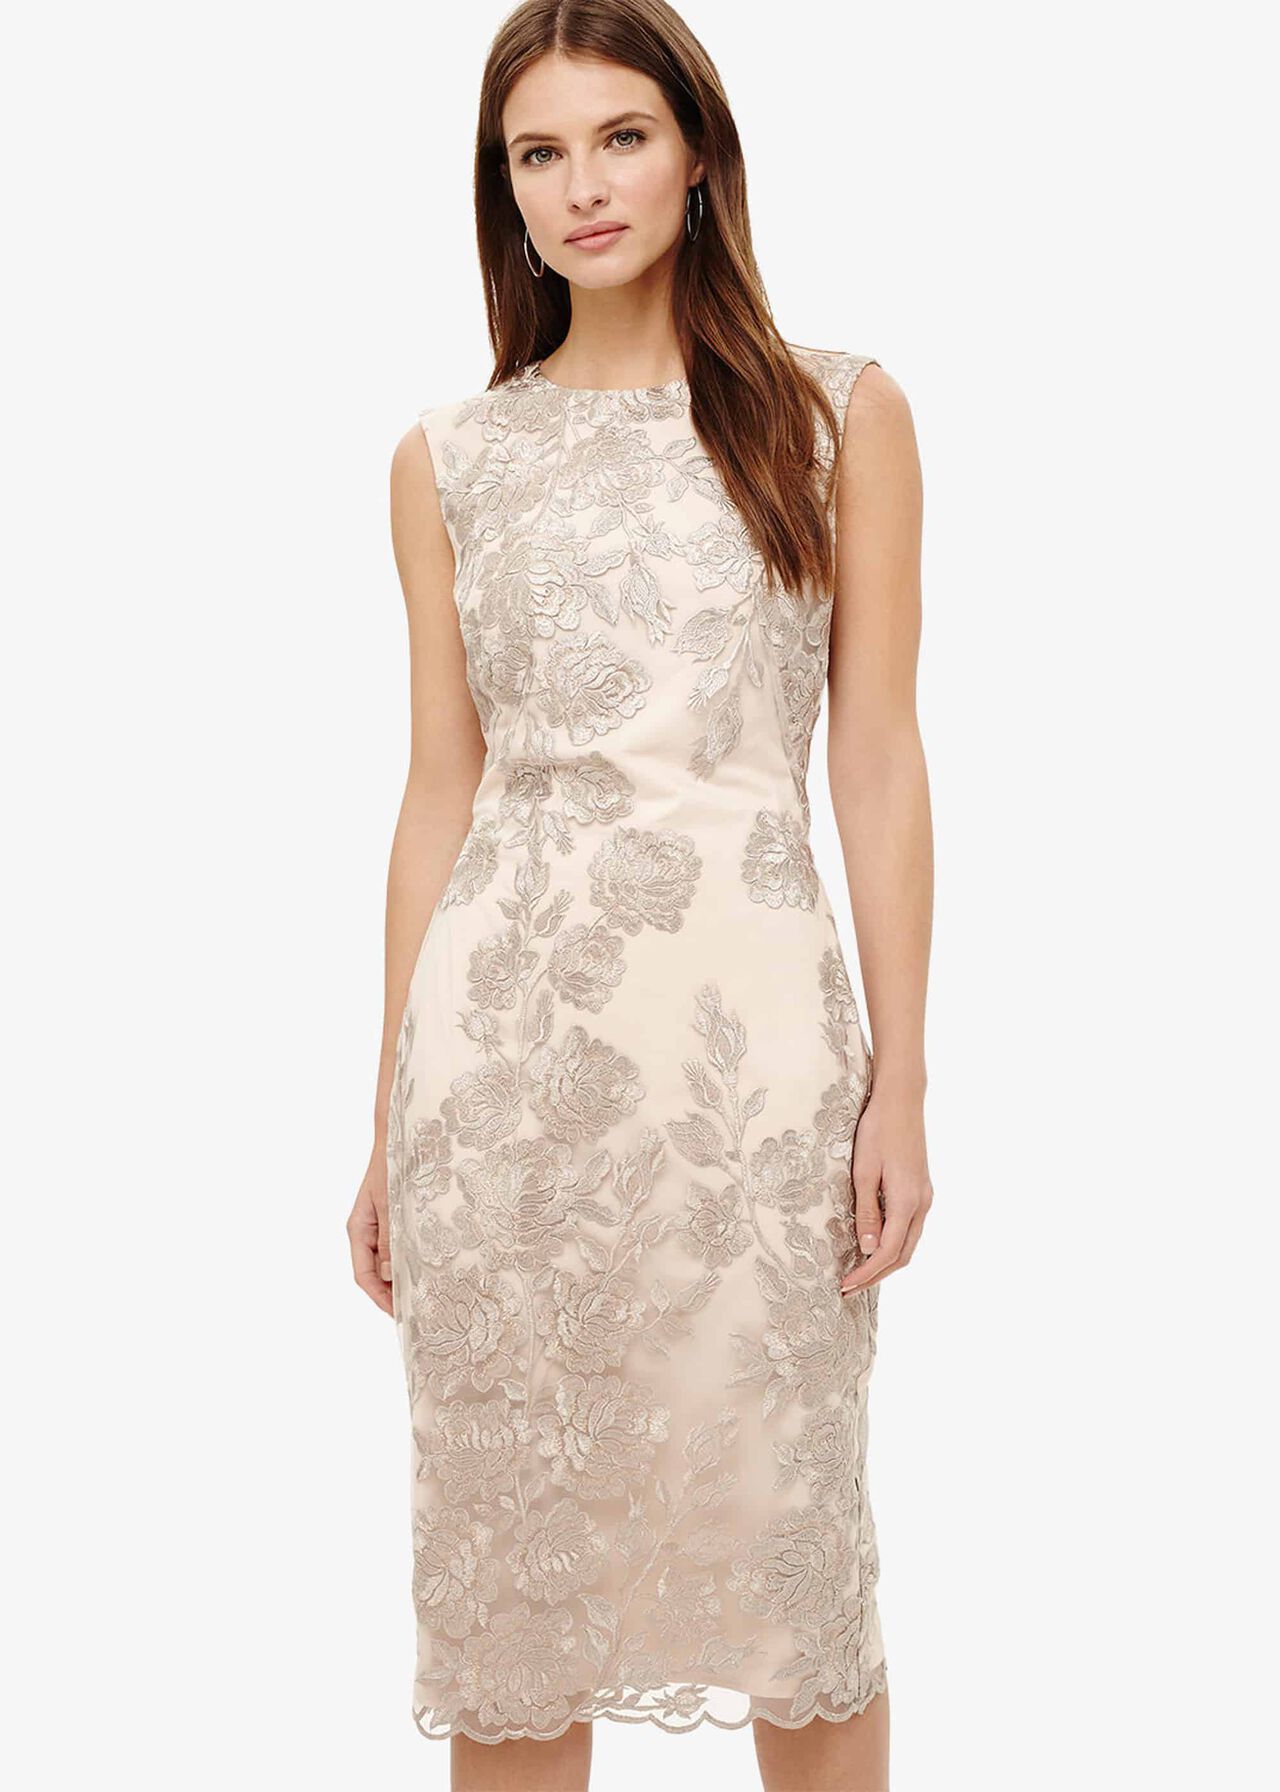 Rhea Lace Floral Dress | Phase Eight